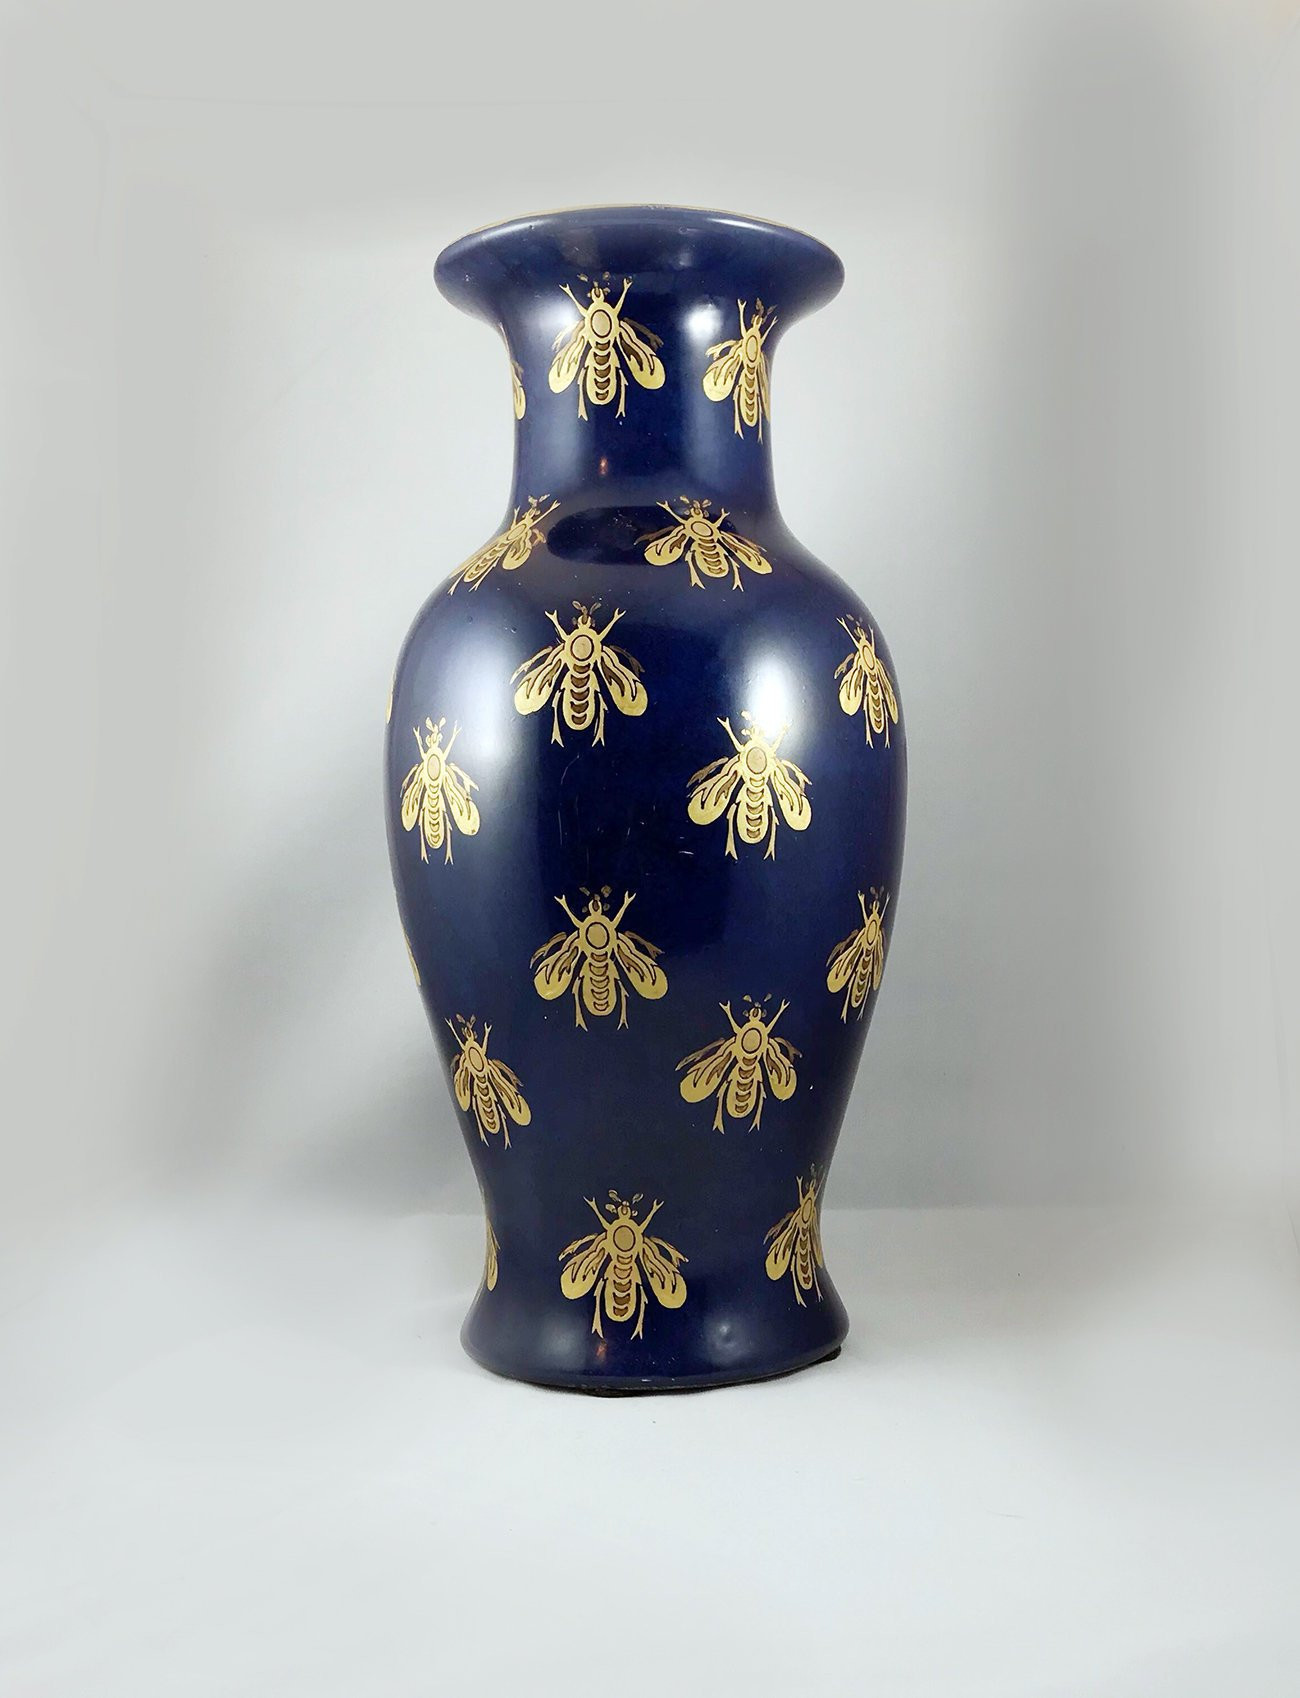 10 Lovable White Ceramic Owl Vase 2024 free download white ceramic owl vase of royal blue flower vase with golden hand painted bumble bees etsy intended for dc29fc294c28ezoom